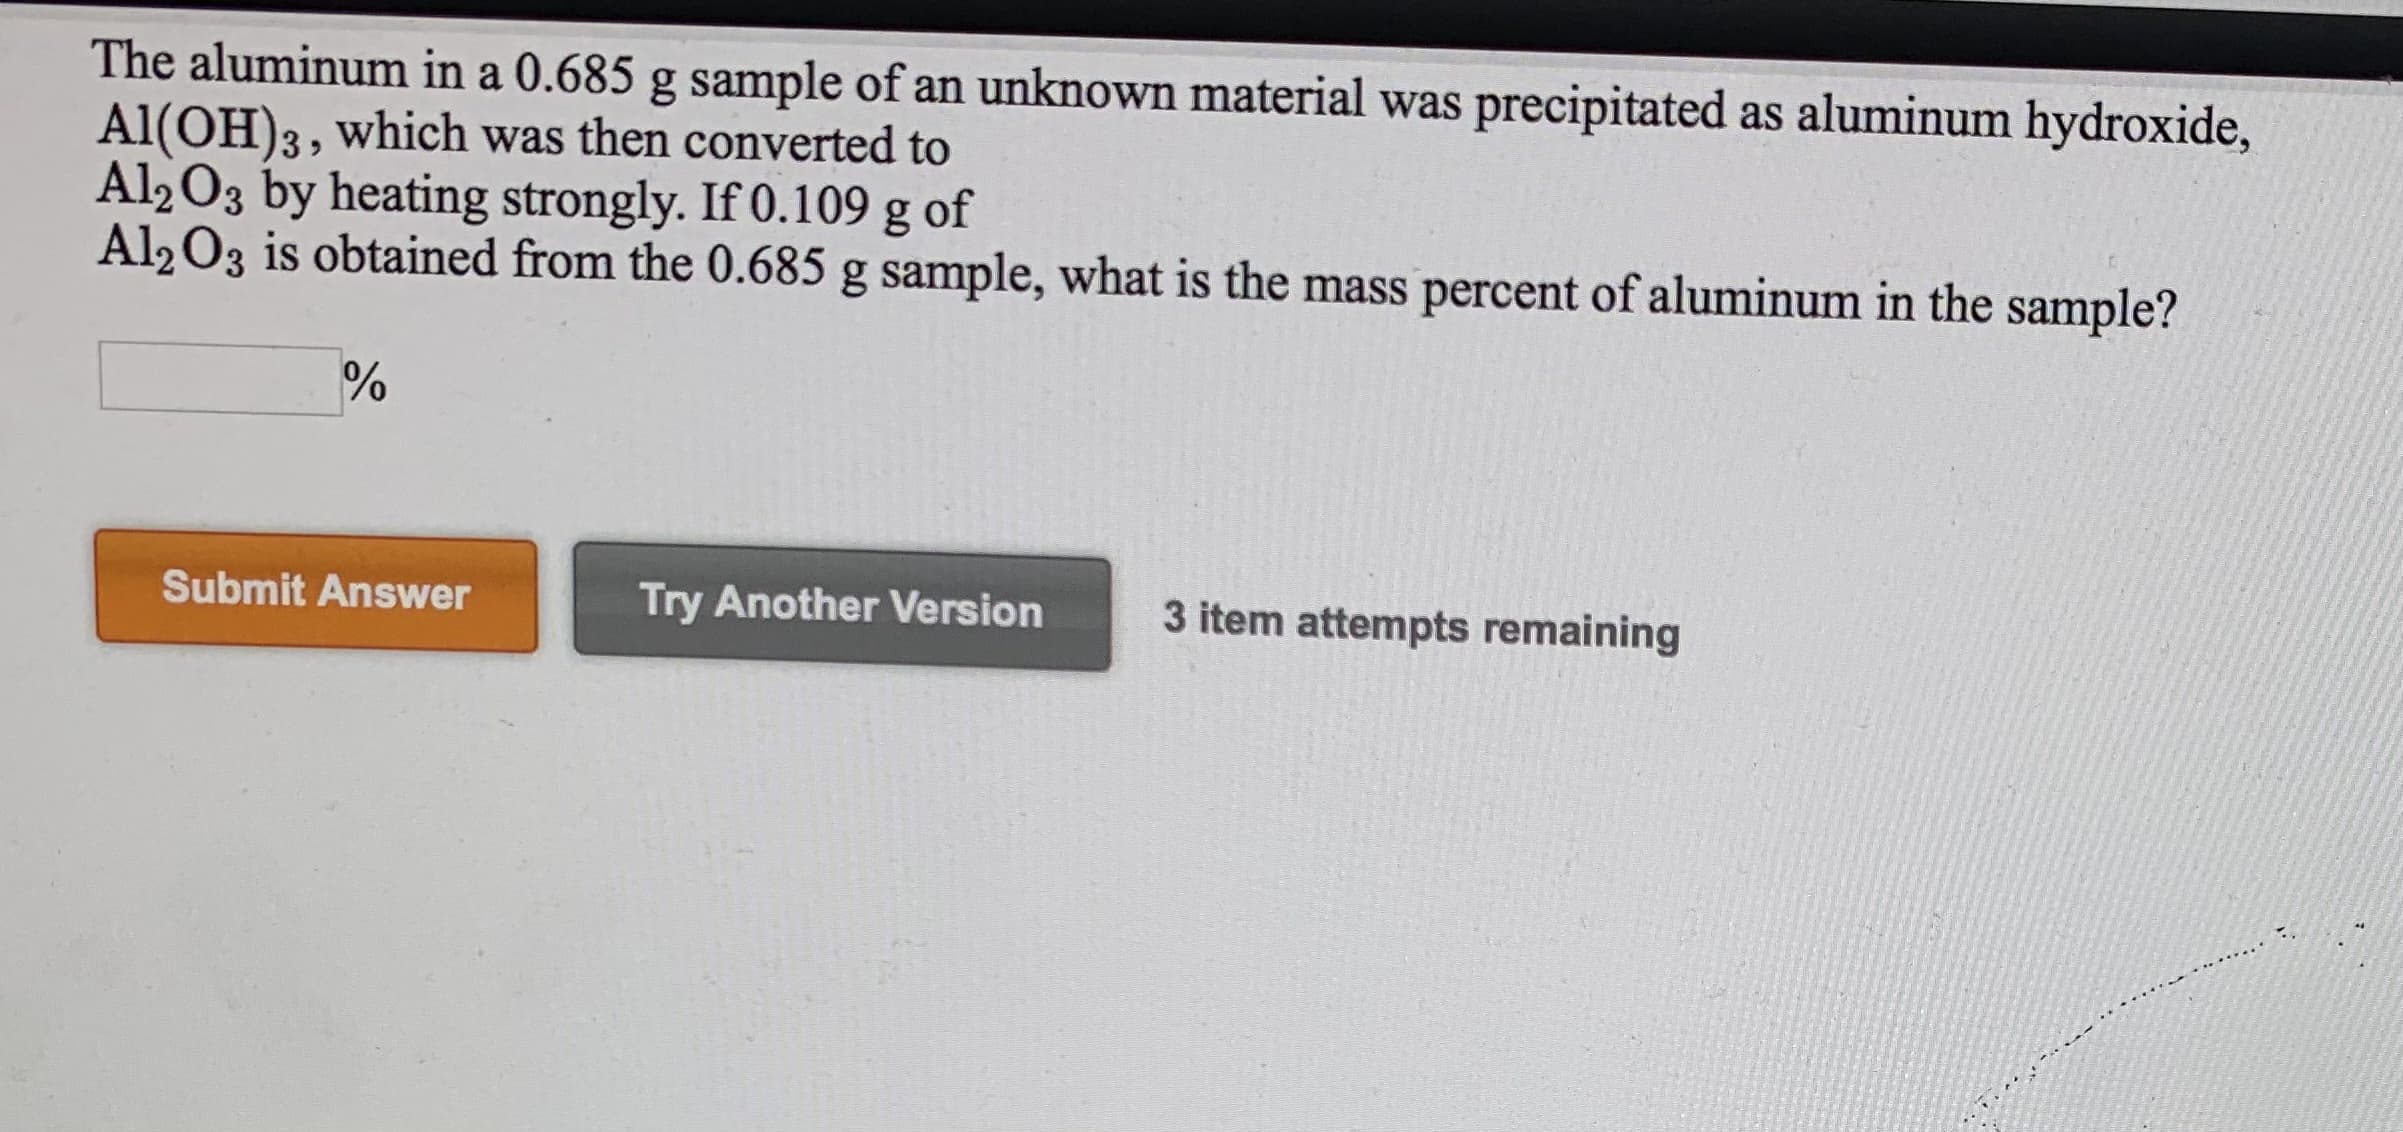 The aluminum in a 0.685 g sample of an unknown material was precipitated as aluminum hydroxide,
Al(OH)3, which was then converted to
Al2 03 by heating strongly. If 0.109 g of
Al203 is obtained from the 0.685 g sample, what is the mass percent of aluminum in the sample?
